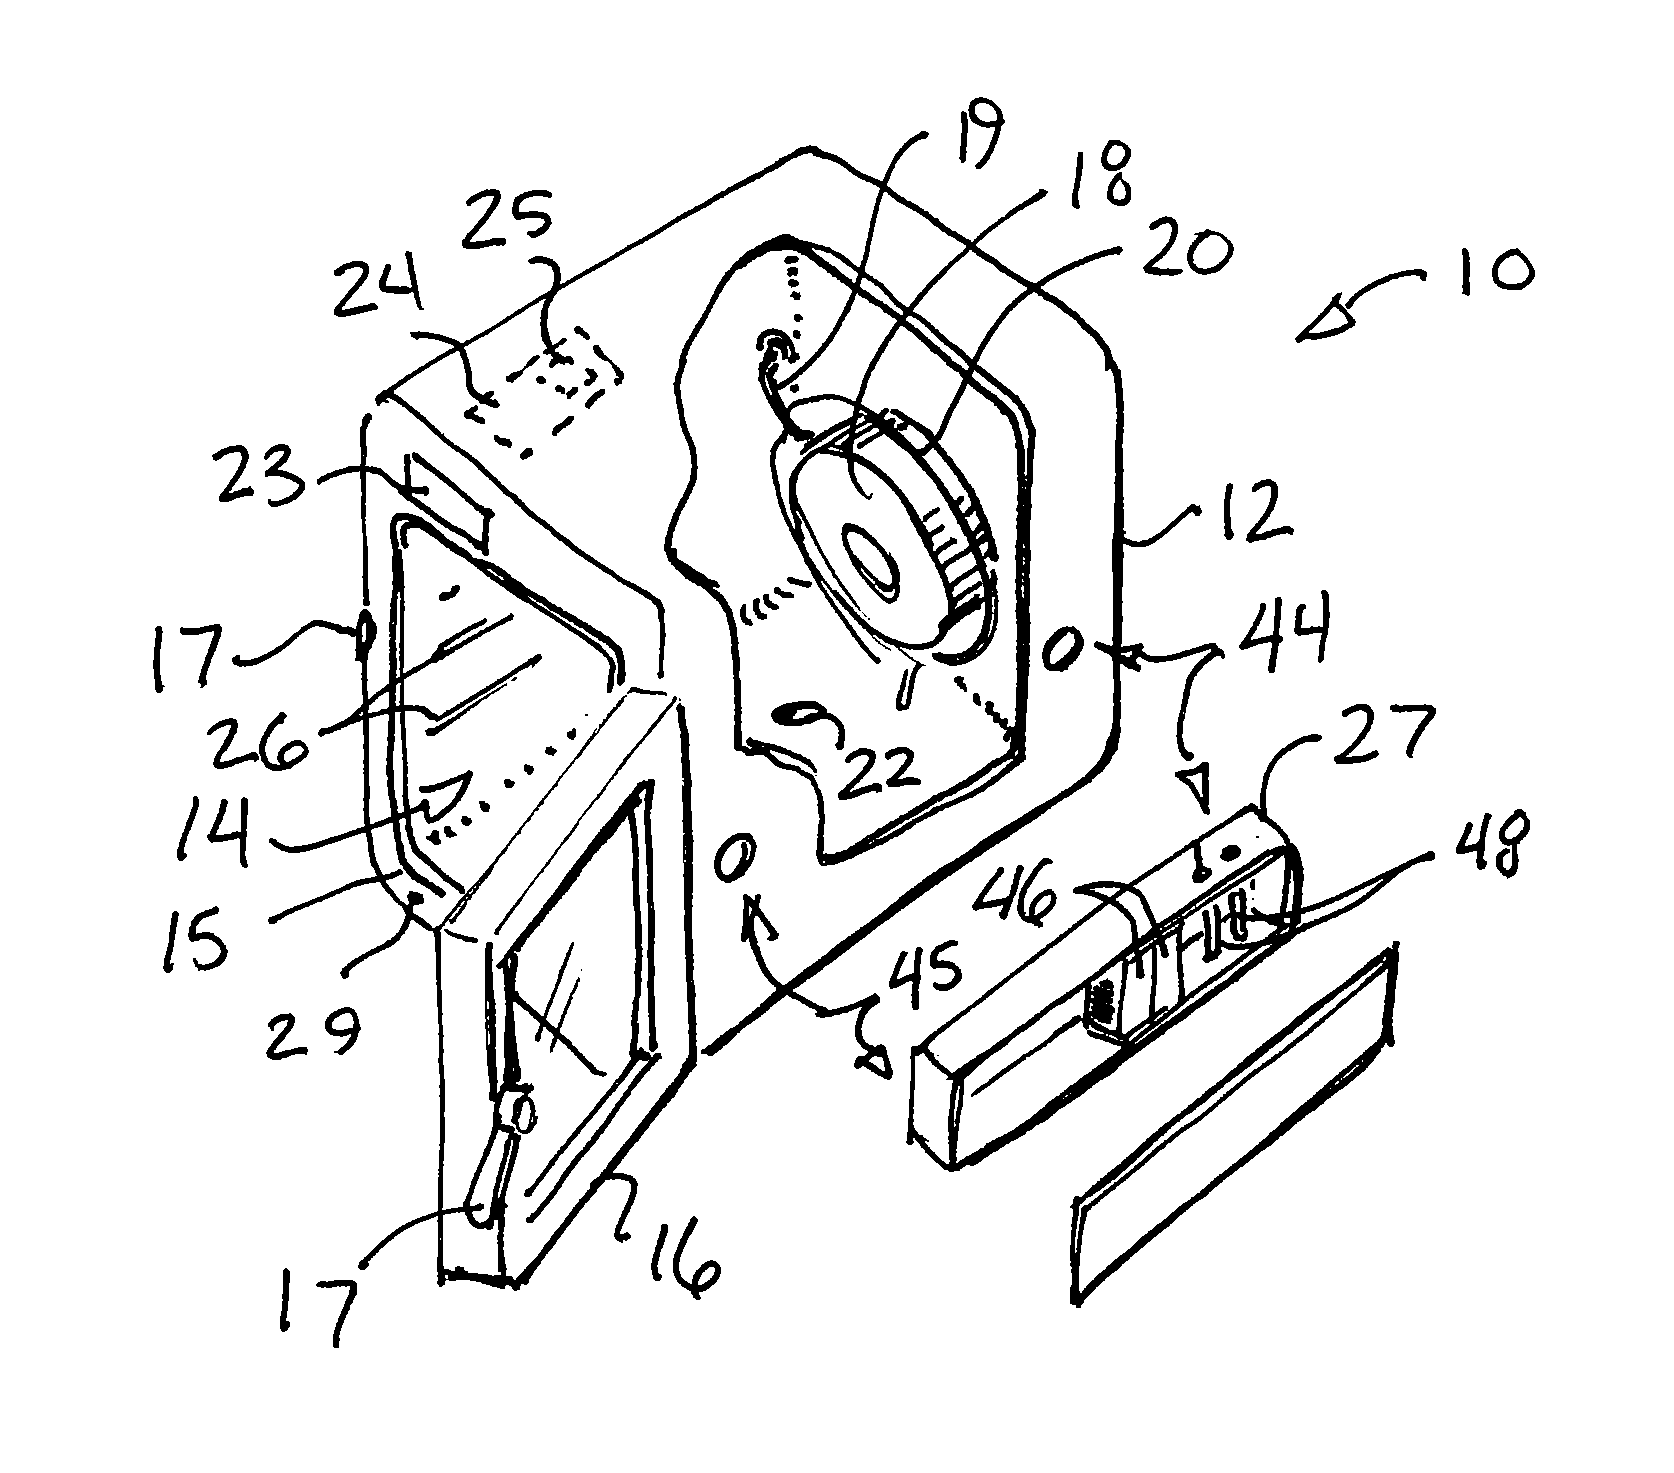 Combination Oven with Catalytic Converter